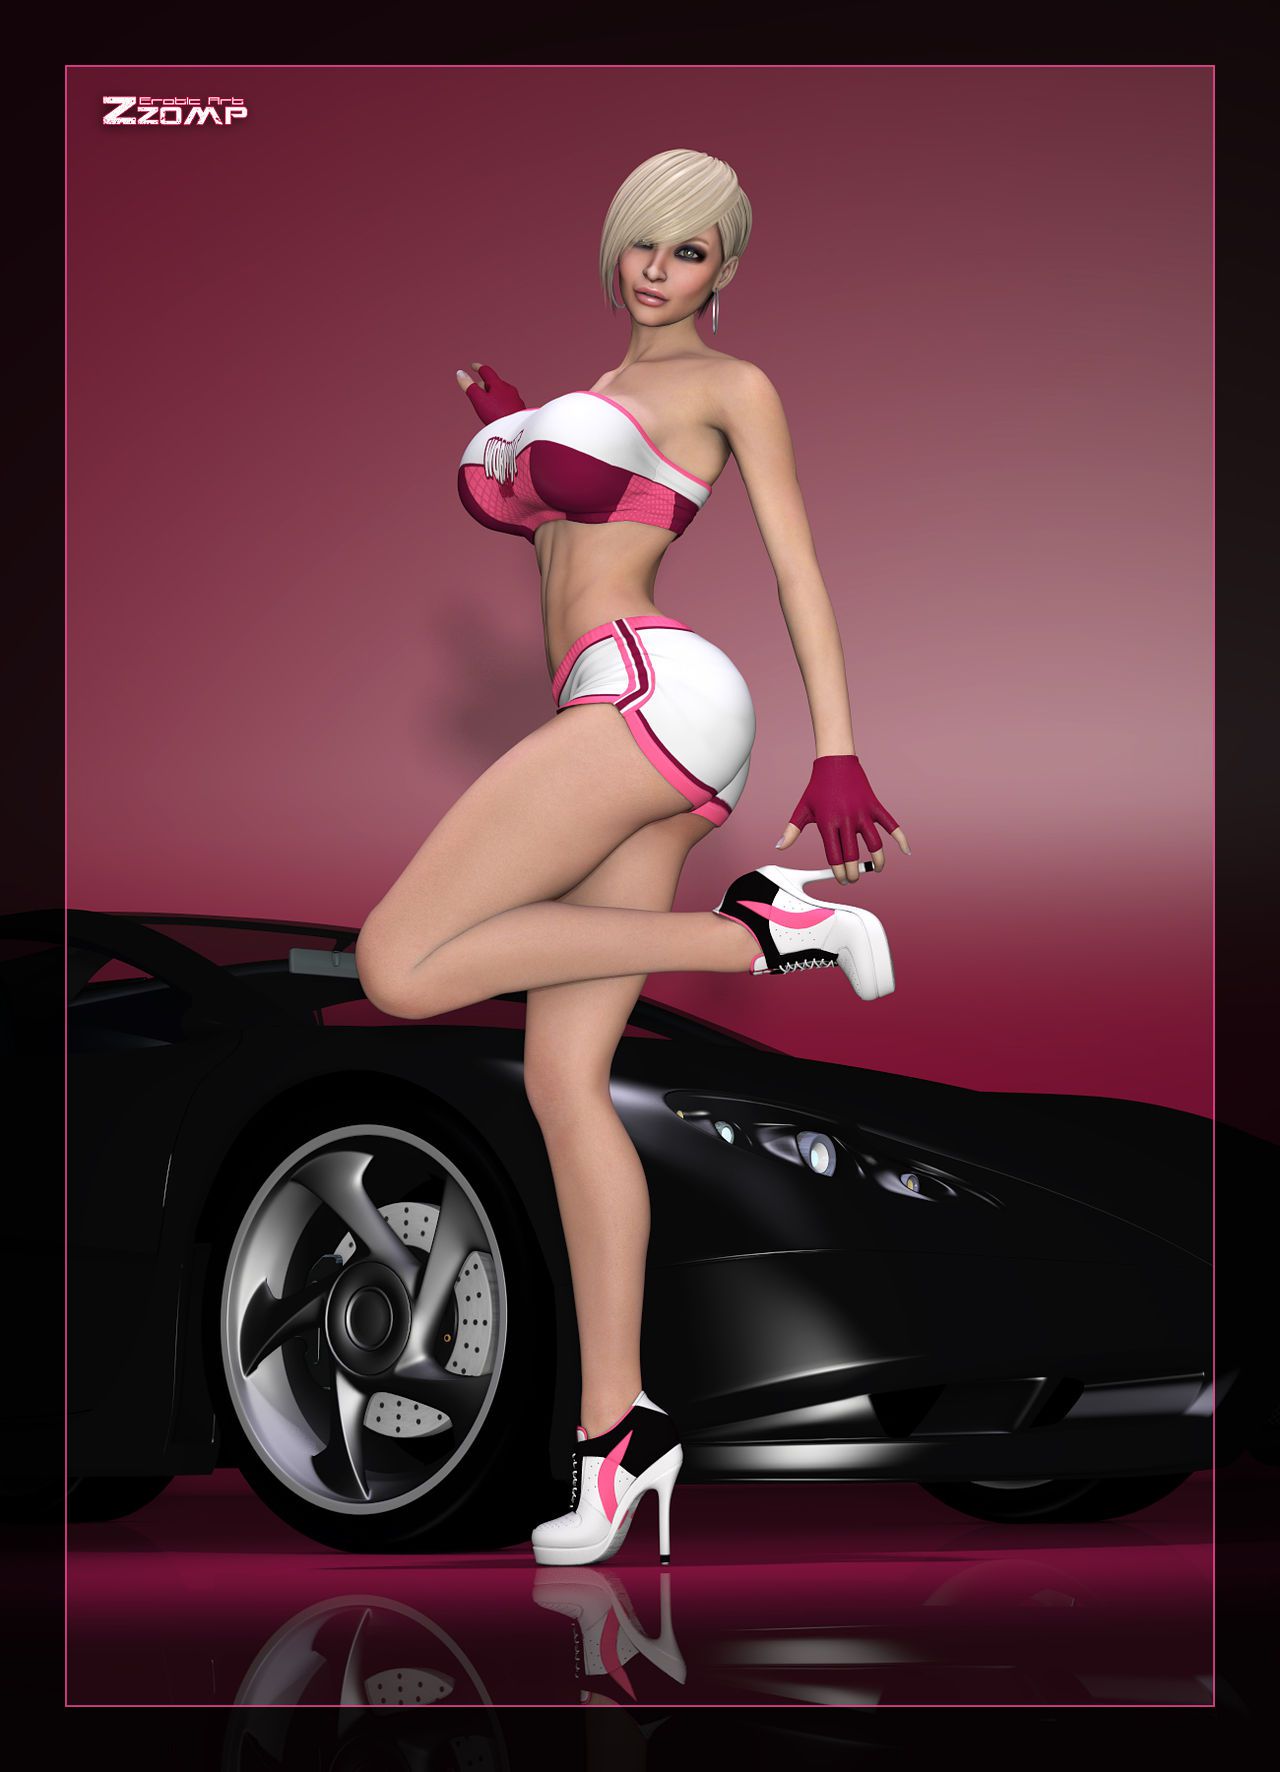 [Zzomp] MCB CarShow Chick 5